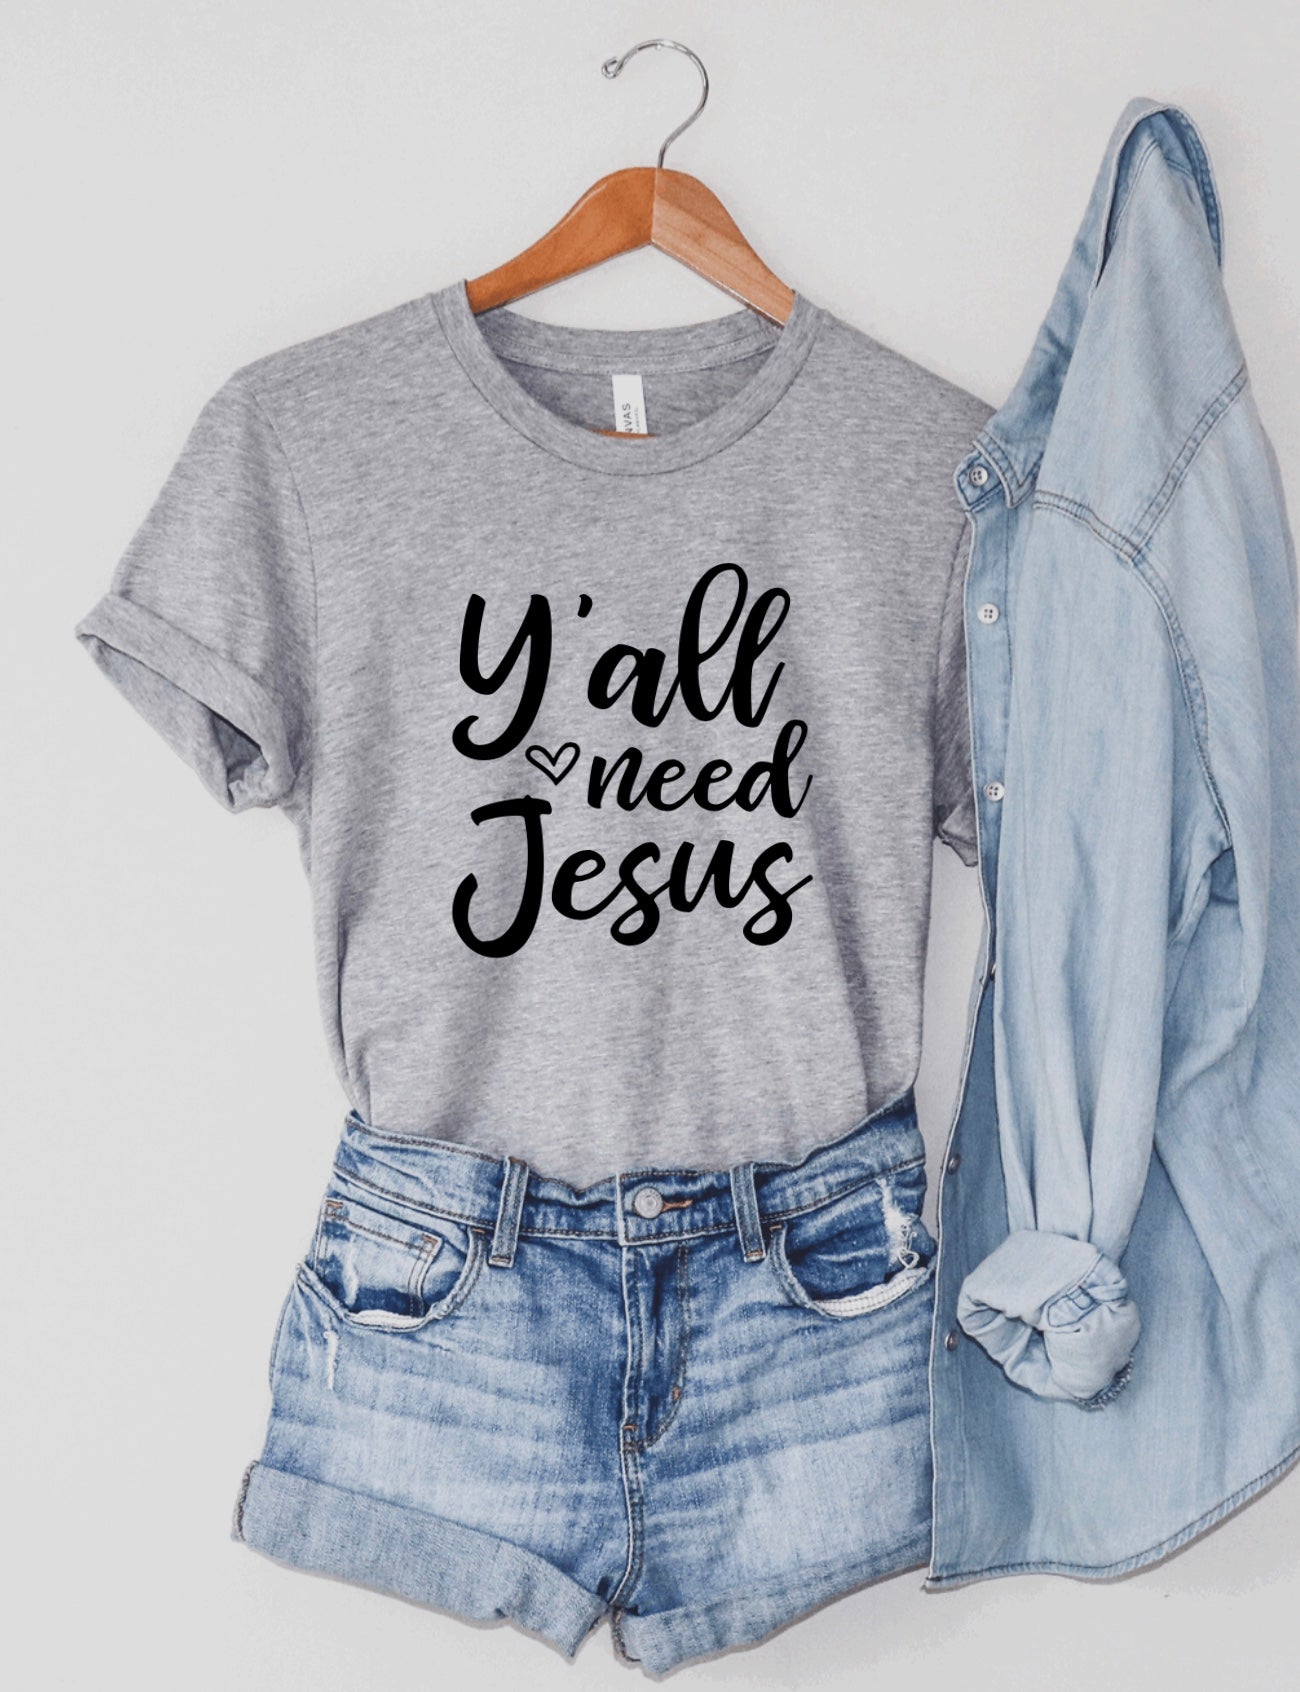 Y’all need Jesus t-shirt 